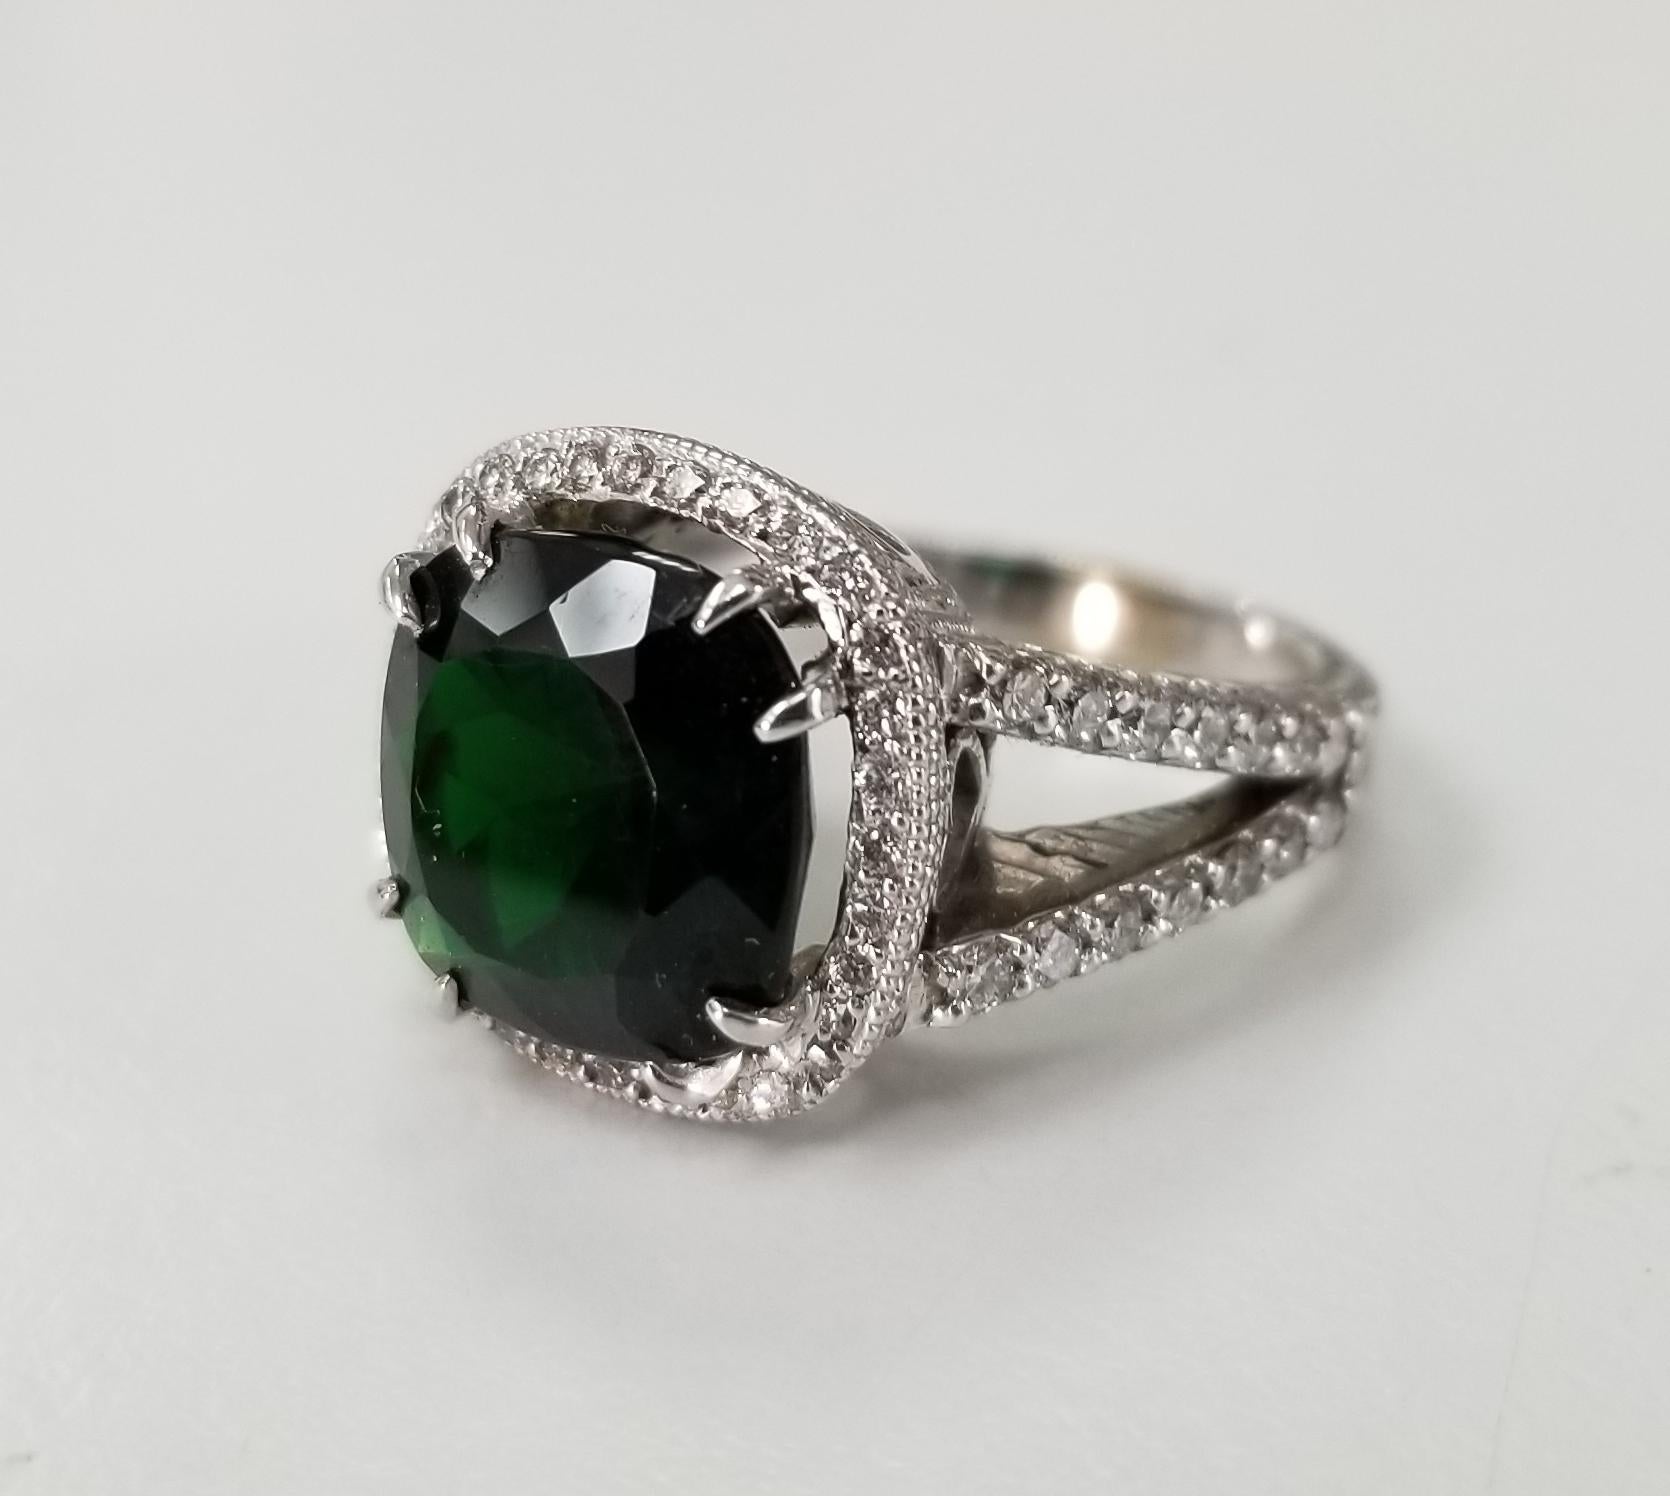 14k white gold Chrome diopside and diamond ring, containing 1 cushion cut Chrome diopside weighing 4.70cts. and 32 round diamonds of very fine quality weighing .60pts. On a hand engraved setting.  This ring is a size 5.5 but we will size to fit for